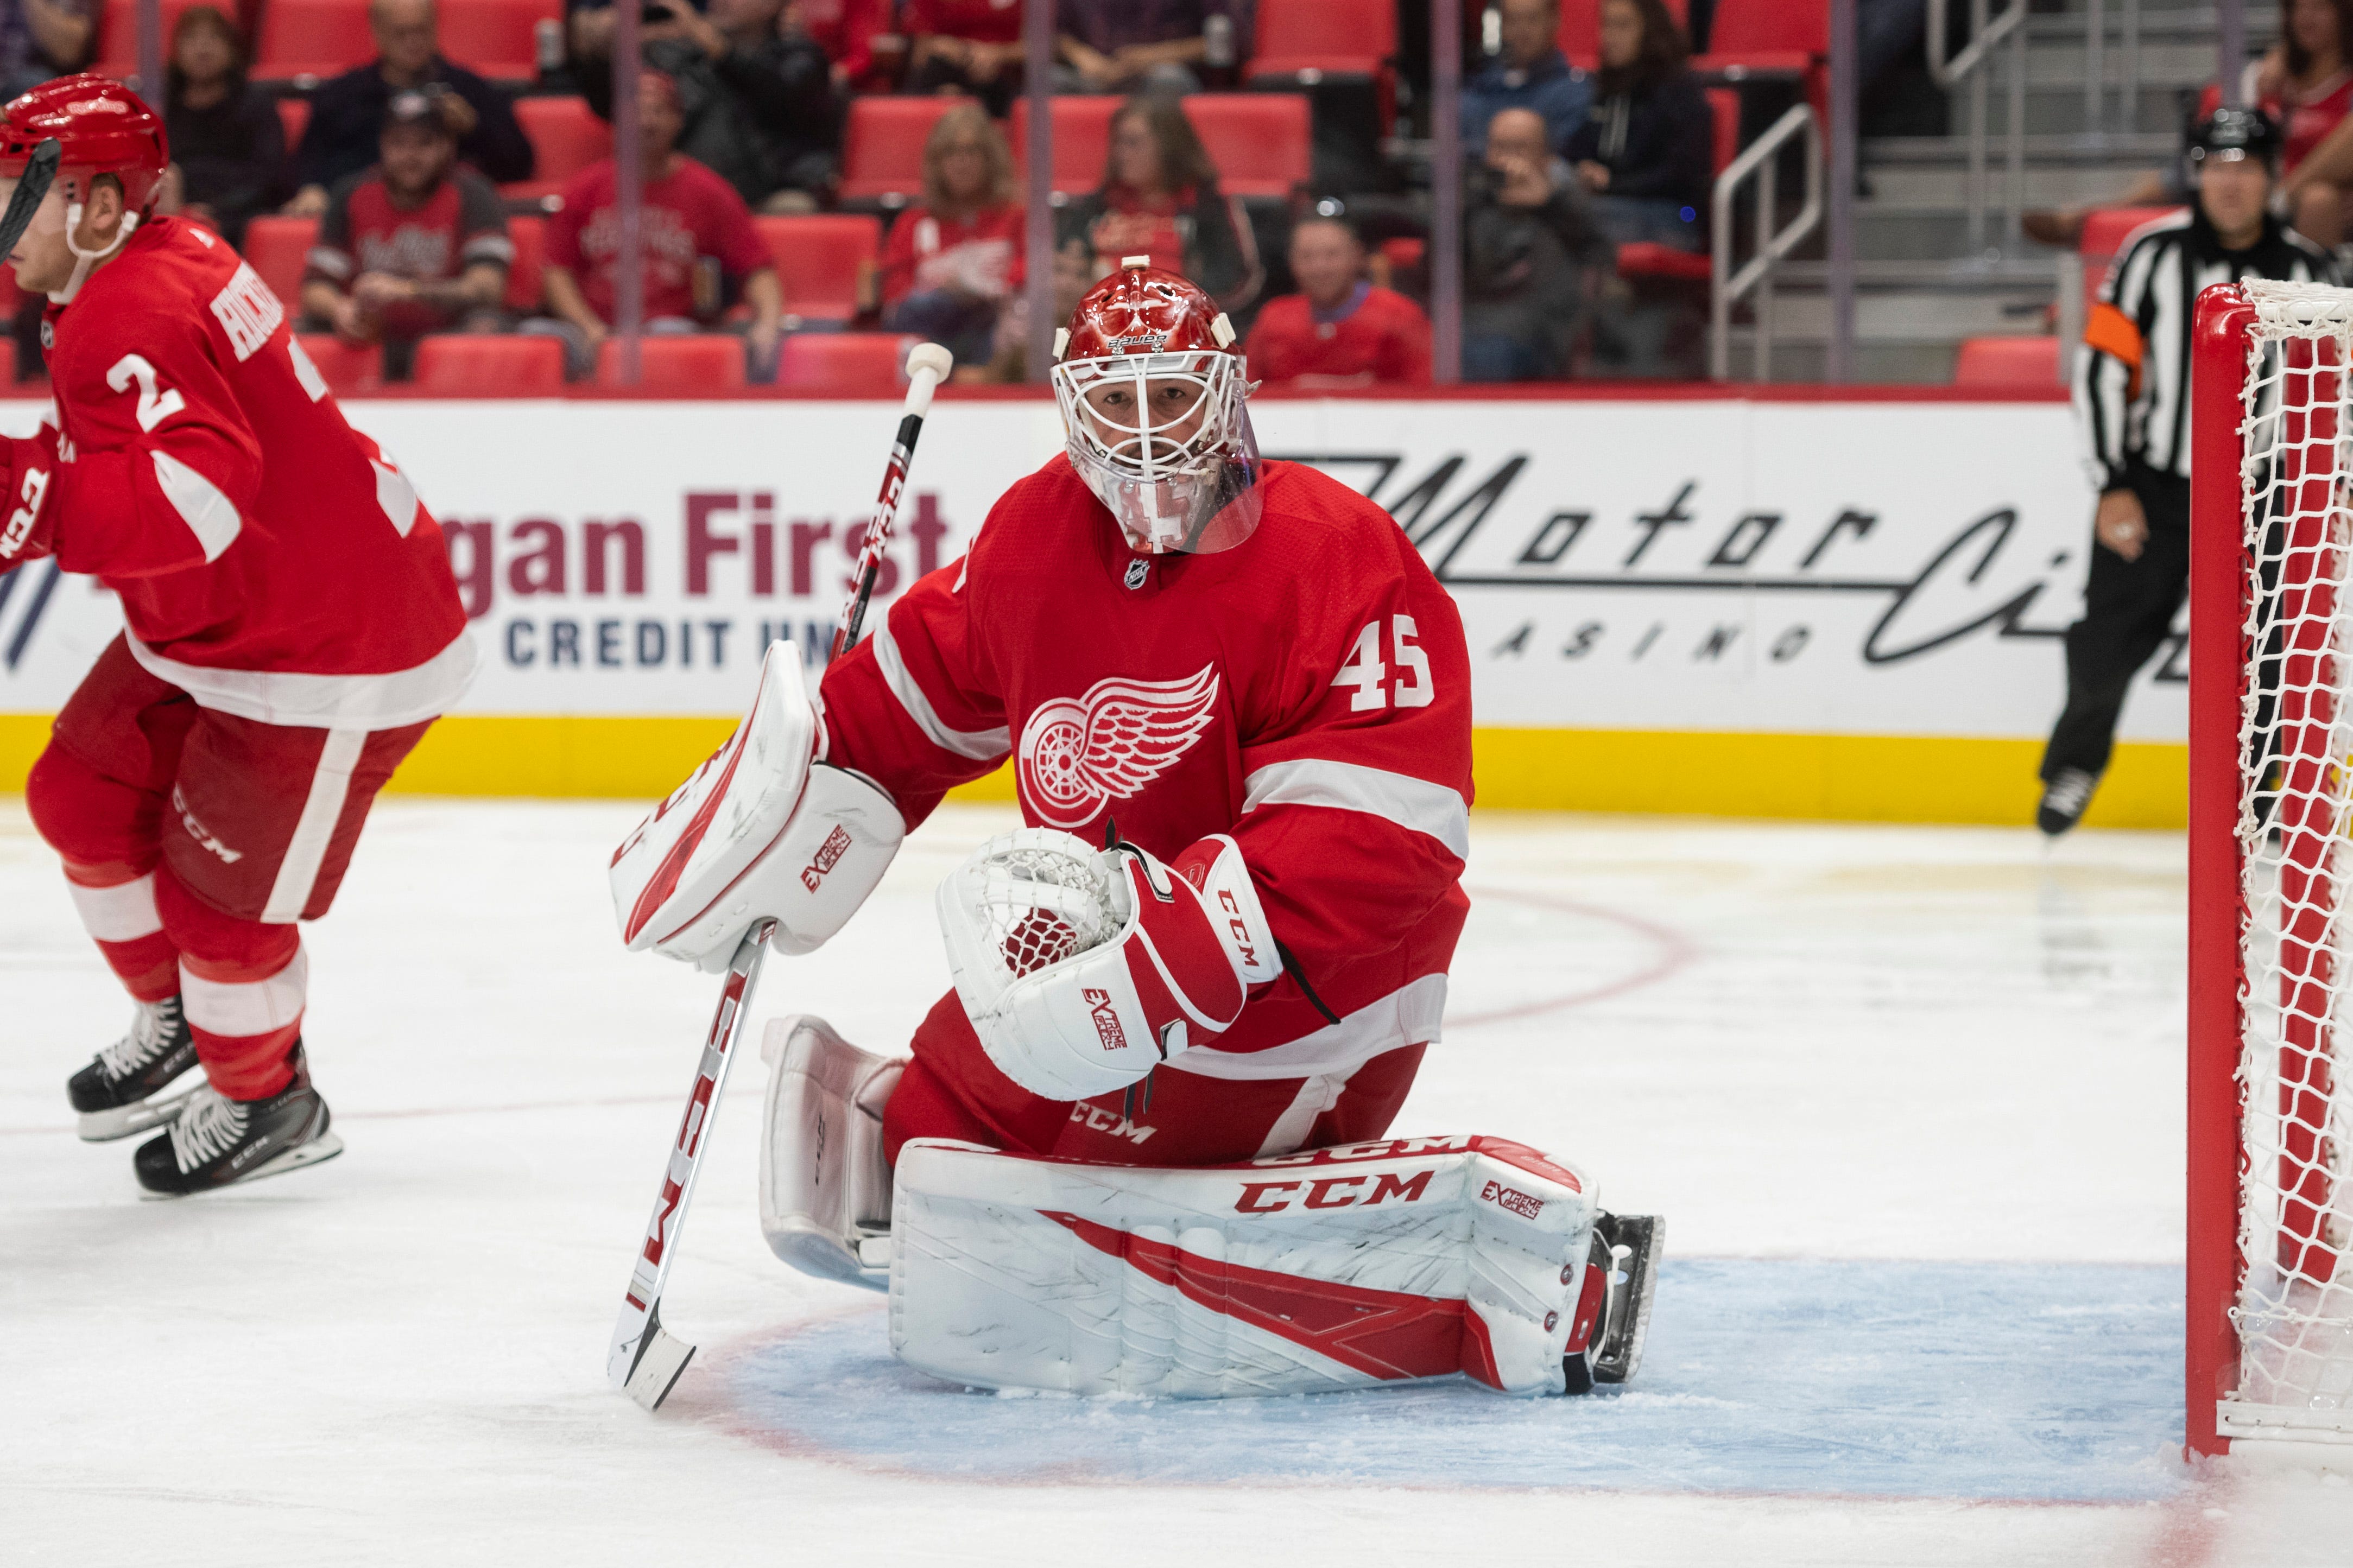 JONATHAN BERNIER: AGE: 30. HT: 6-0. WT: 185. STATS (Colorado): 19-13-3, 2.85 GAA, .913 SV. ANALYSIS: The Wings hope Bernier provides some quality, consistent backup goaltending that has been missing. He could push Jimmy Howard for plenty of playing time.